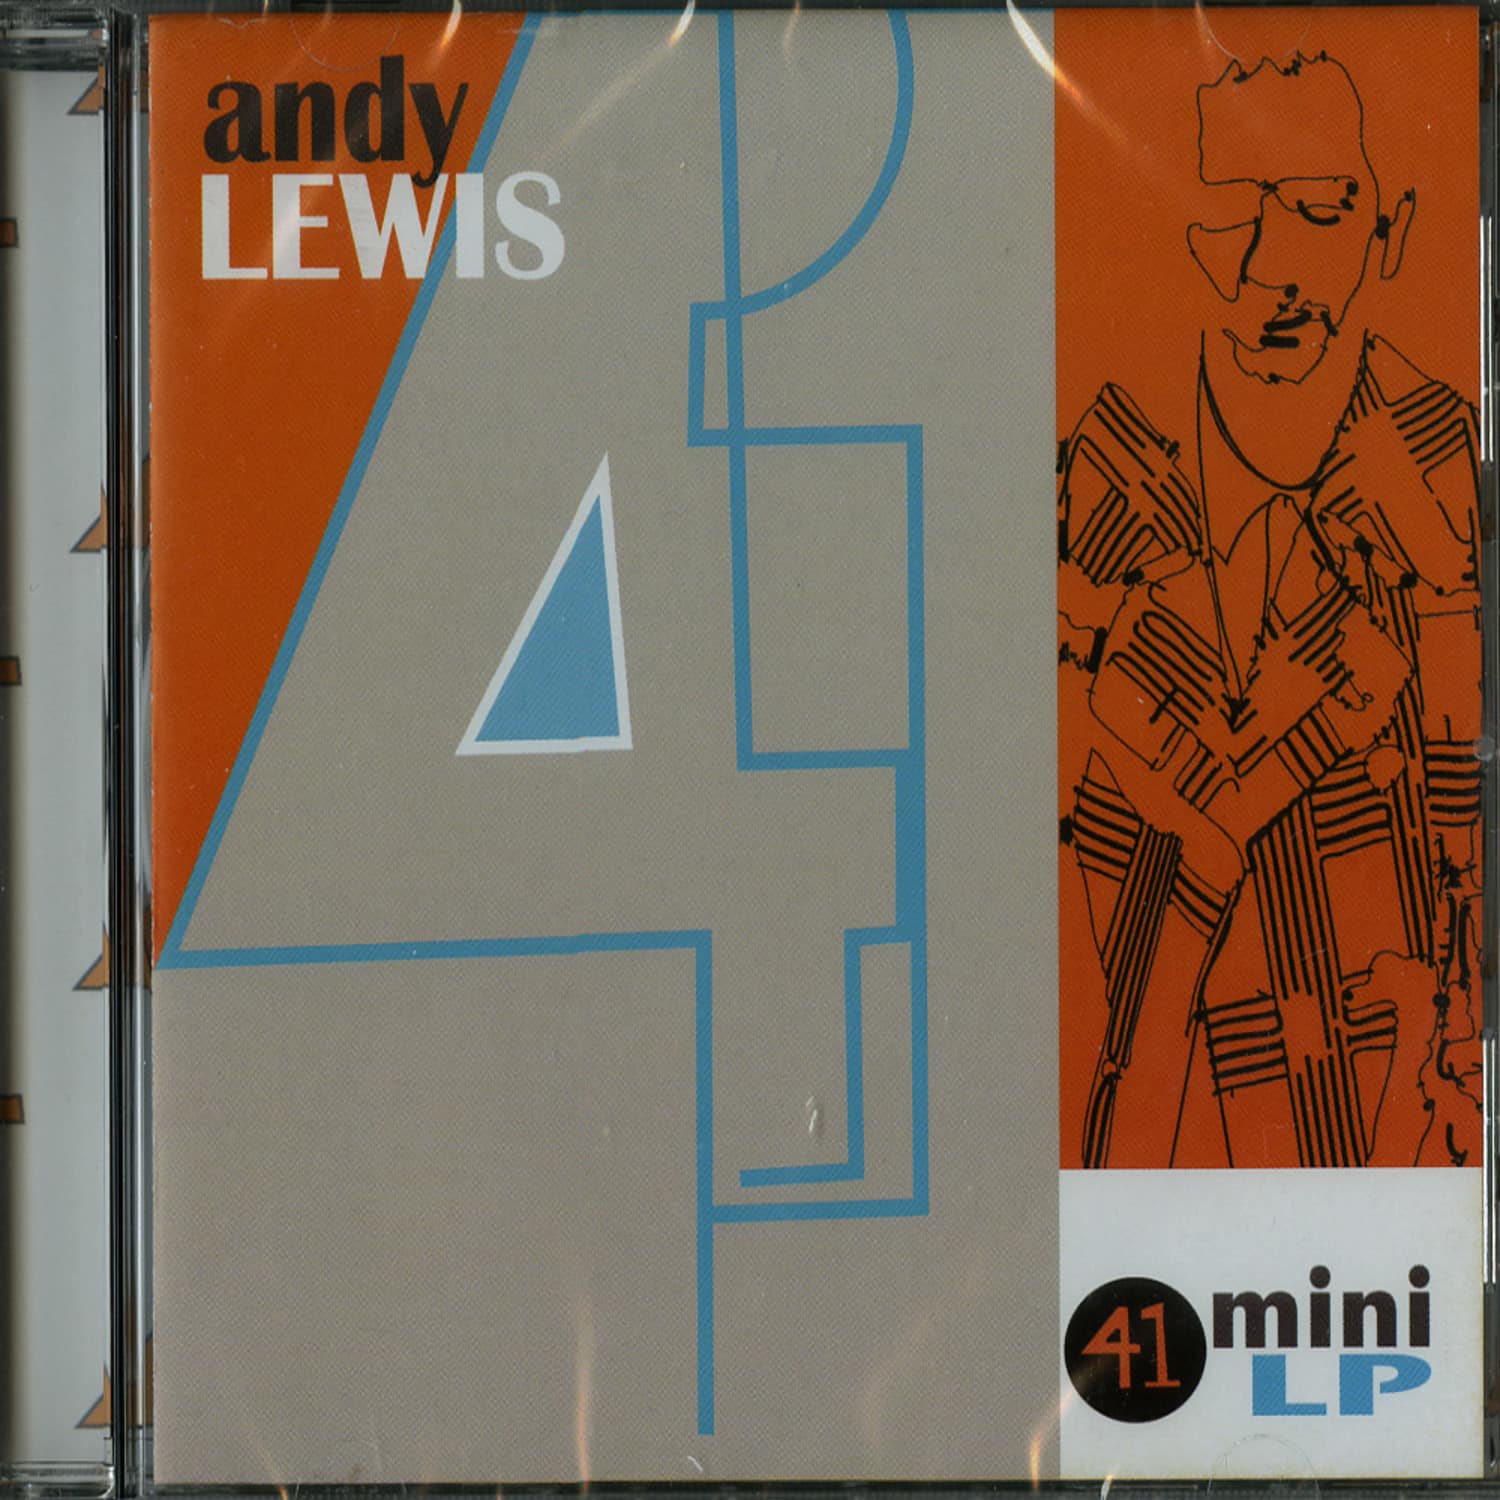 Andy Lewis - 41 